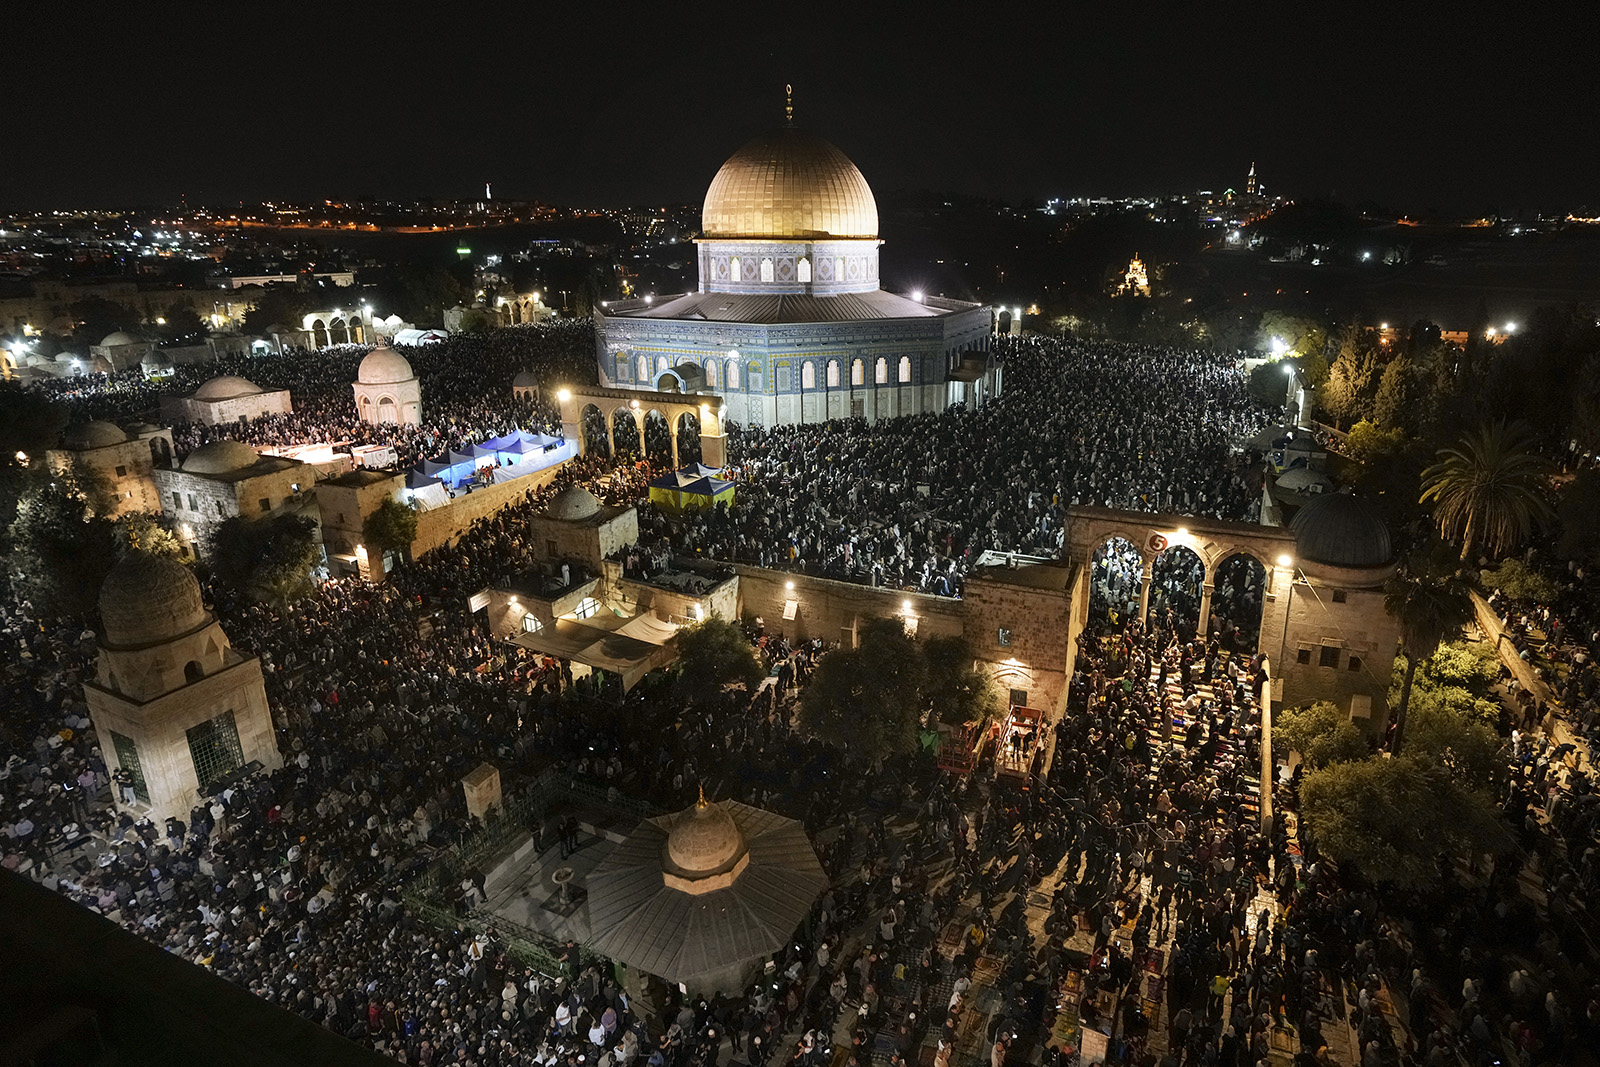 Palestinian Muslim worshippers pray during Laylat Al Qadr, also known as the Night of Power, in front of the Dome of the Rock Mosque, in the Al Aqsa Mosque compound in Jerusalem's Old City, Wednesday, April 27, 2022. Laylat Al Qadr is marked on the 27th day of the holy fasting month of Ramadan and is commemorated as the night Prophet Muhammad received the first revelation of the Quran. Muslims traditionally spend the night in prayer and devotion. (AP Photo/Mahmoud Illean)